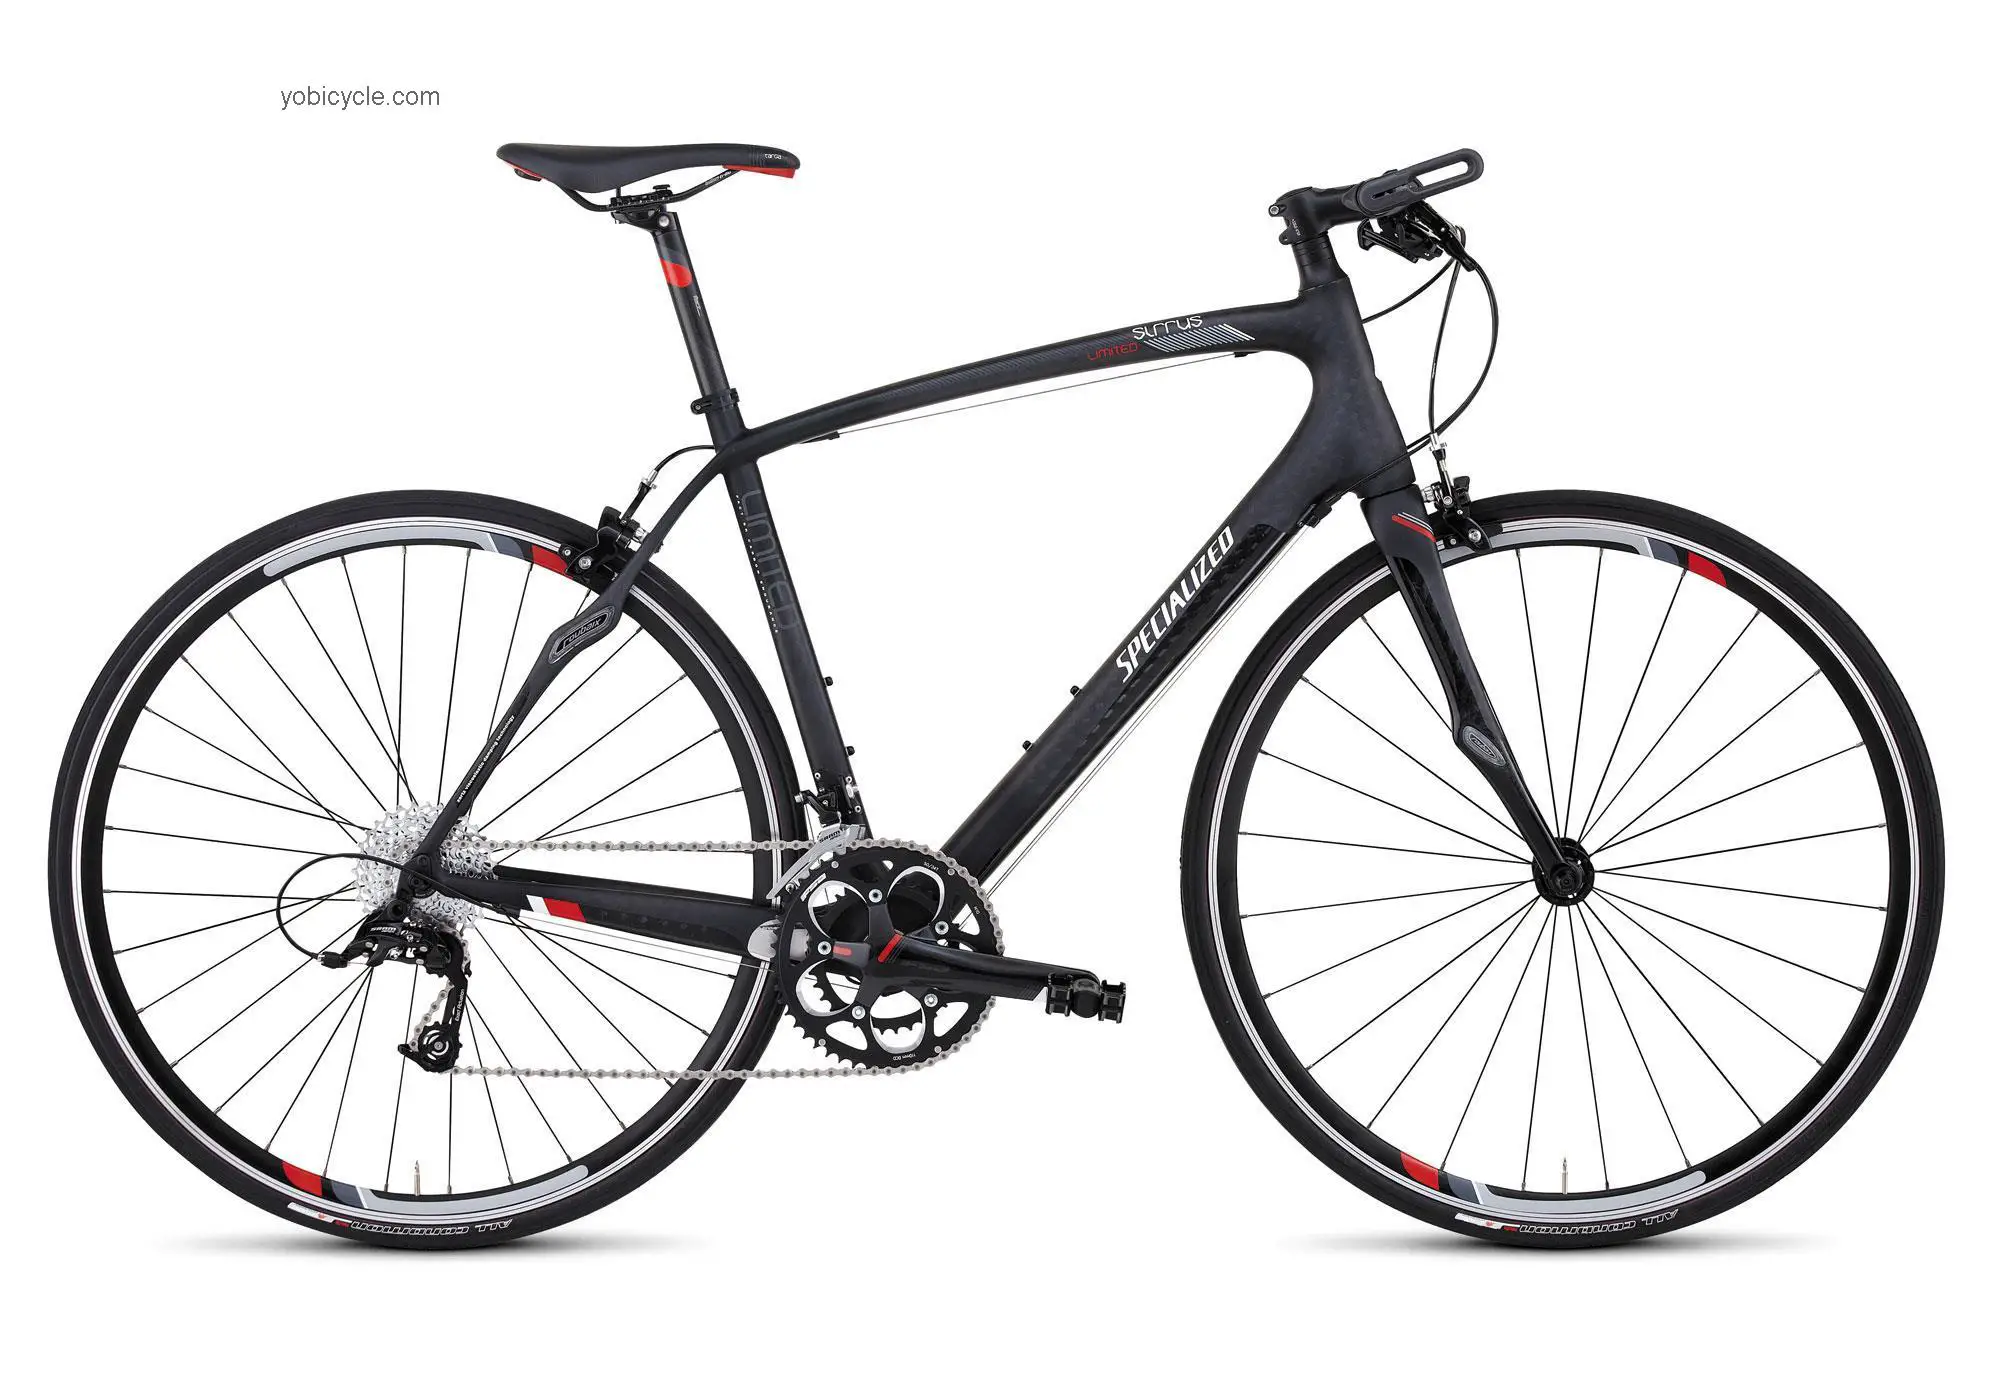 Specialized Source Expert Disc 2012 comparison online with competitors